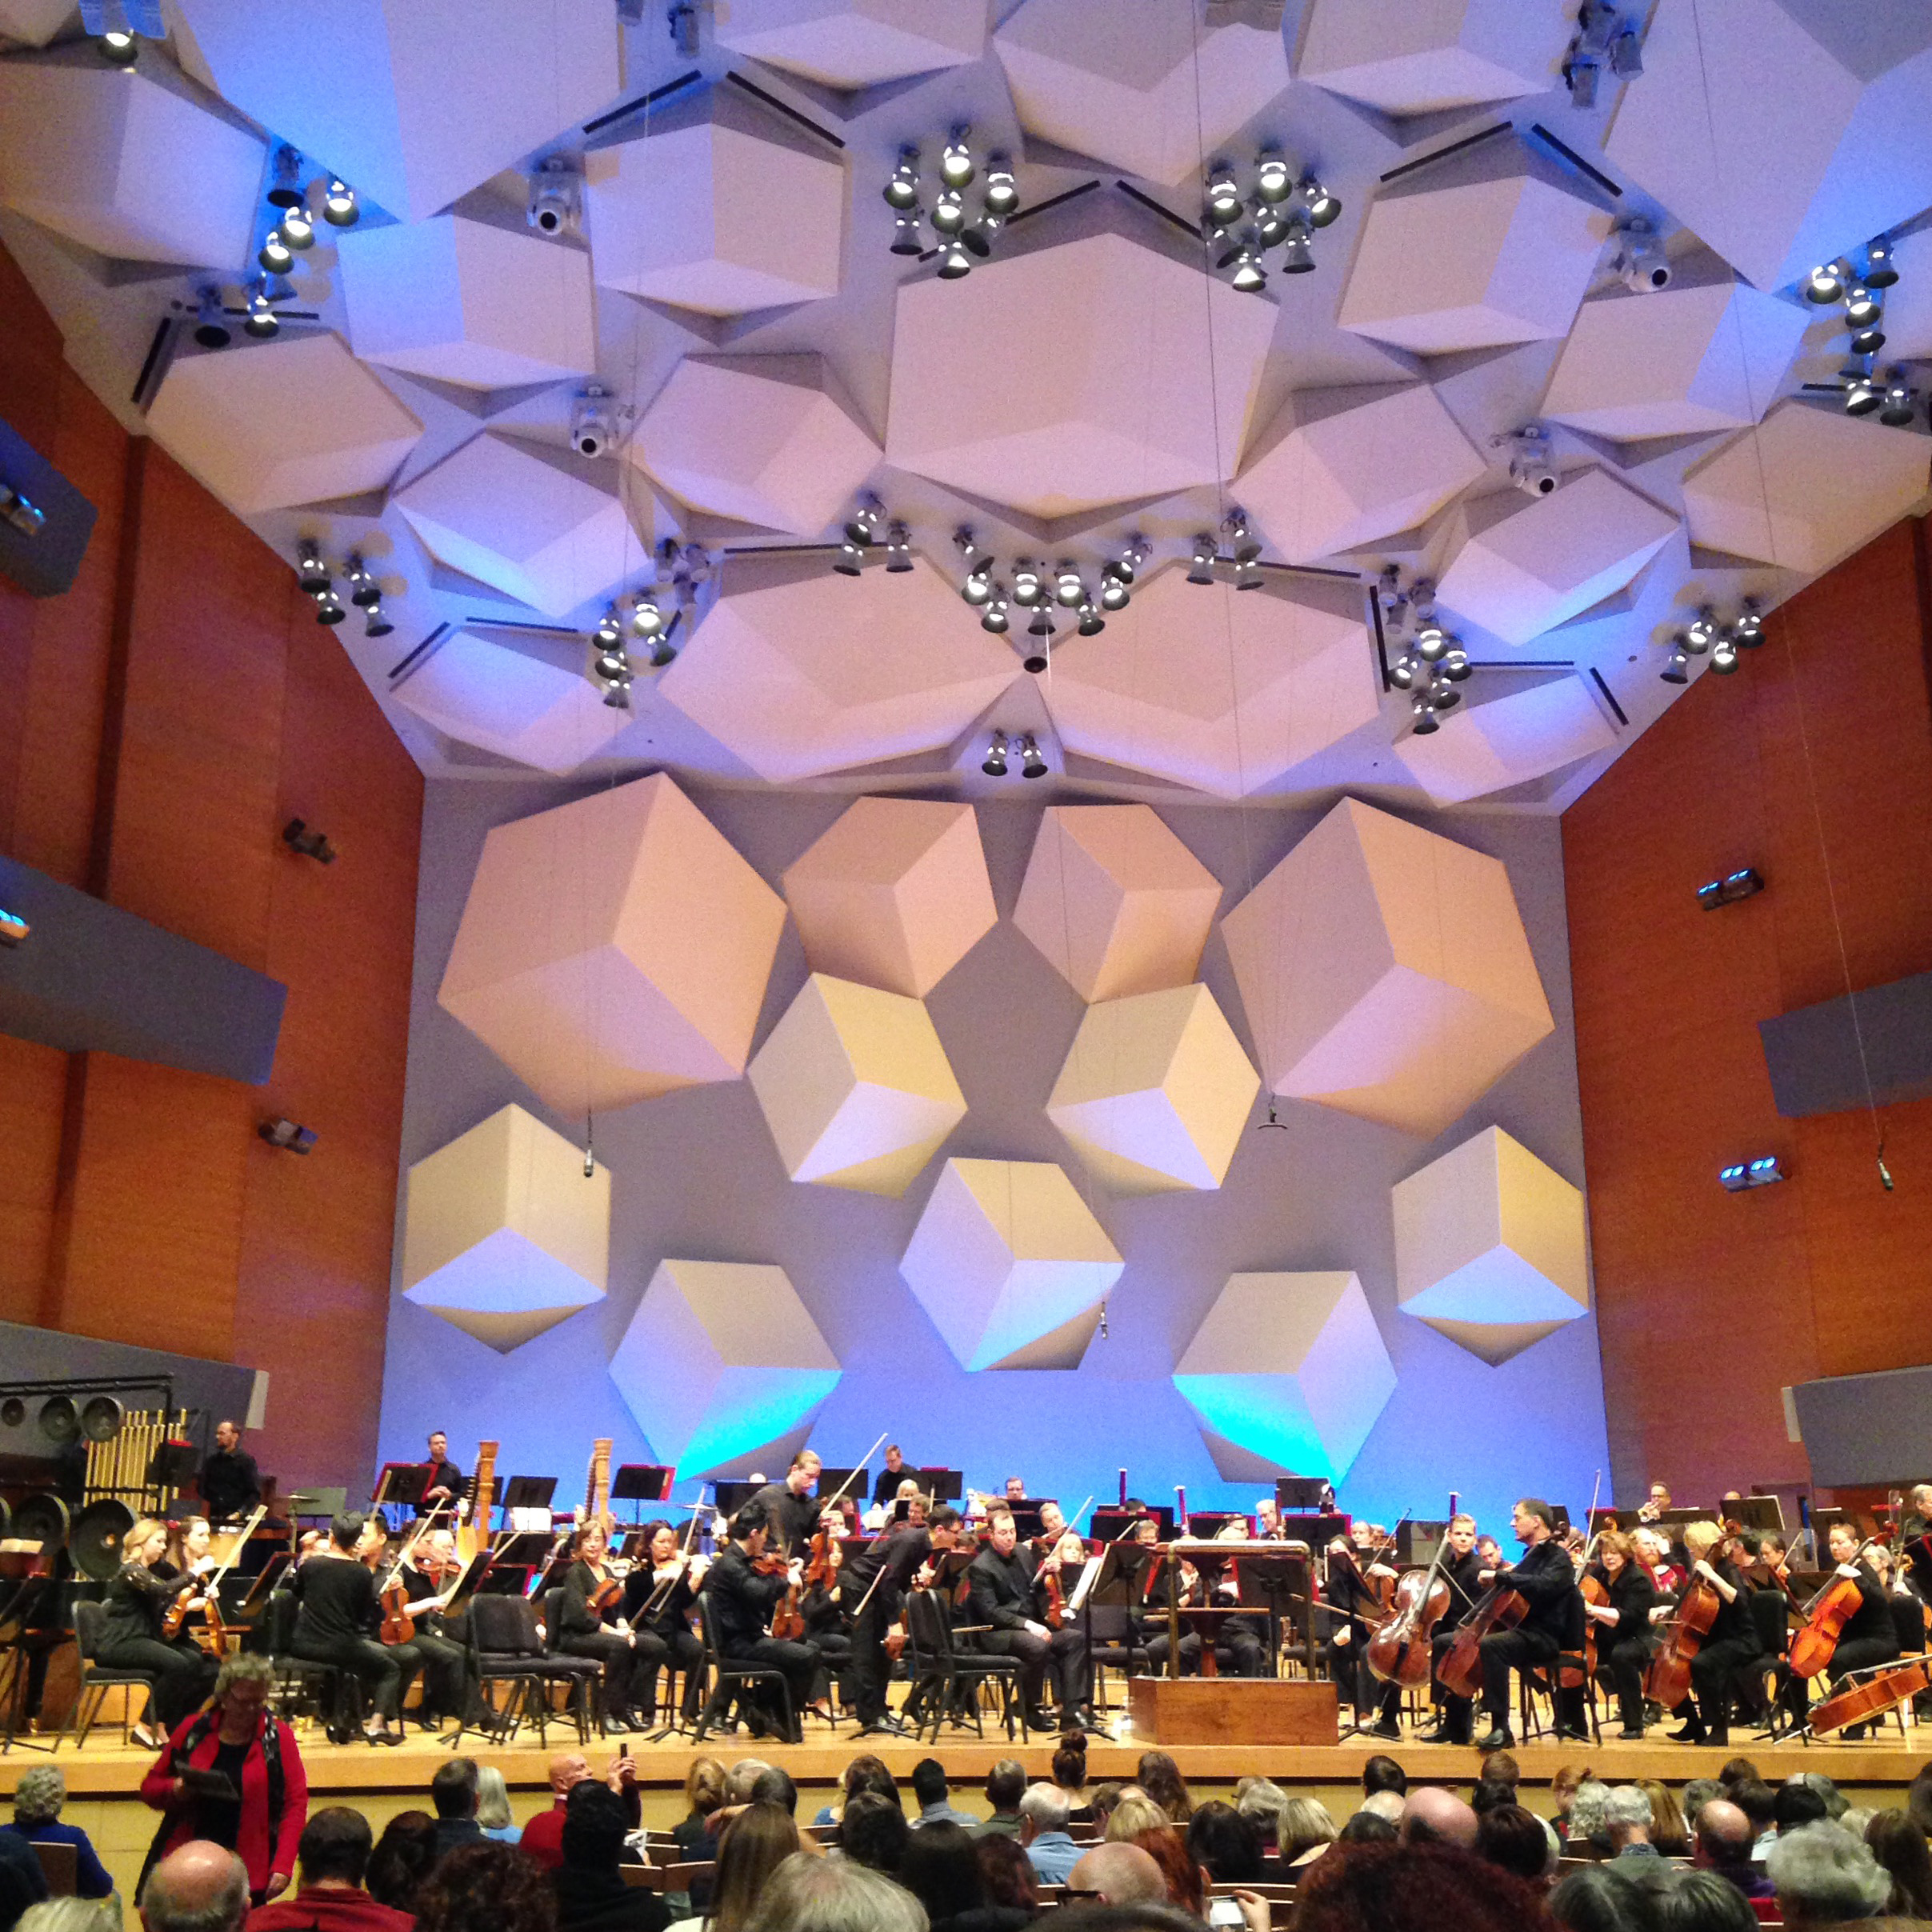 The Minnesota Orchestra onstage at Orchestra Hall performing in front of a near capacity audience.